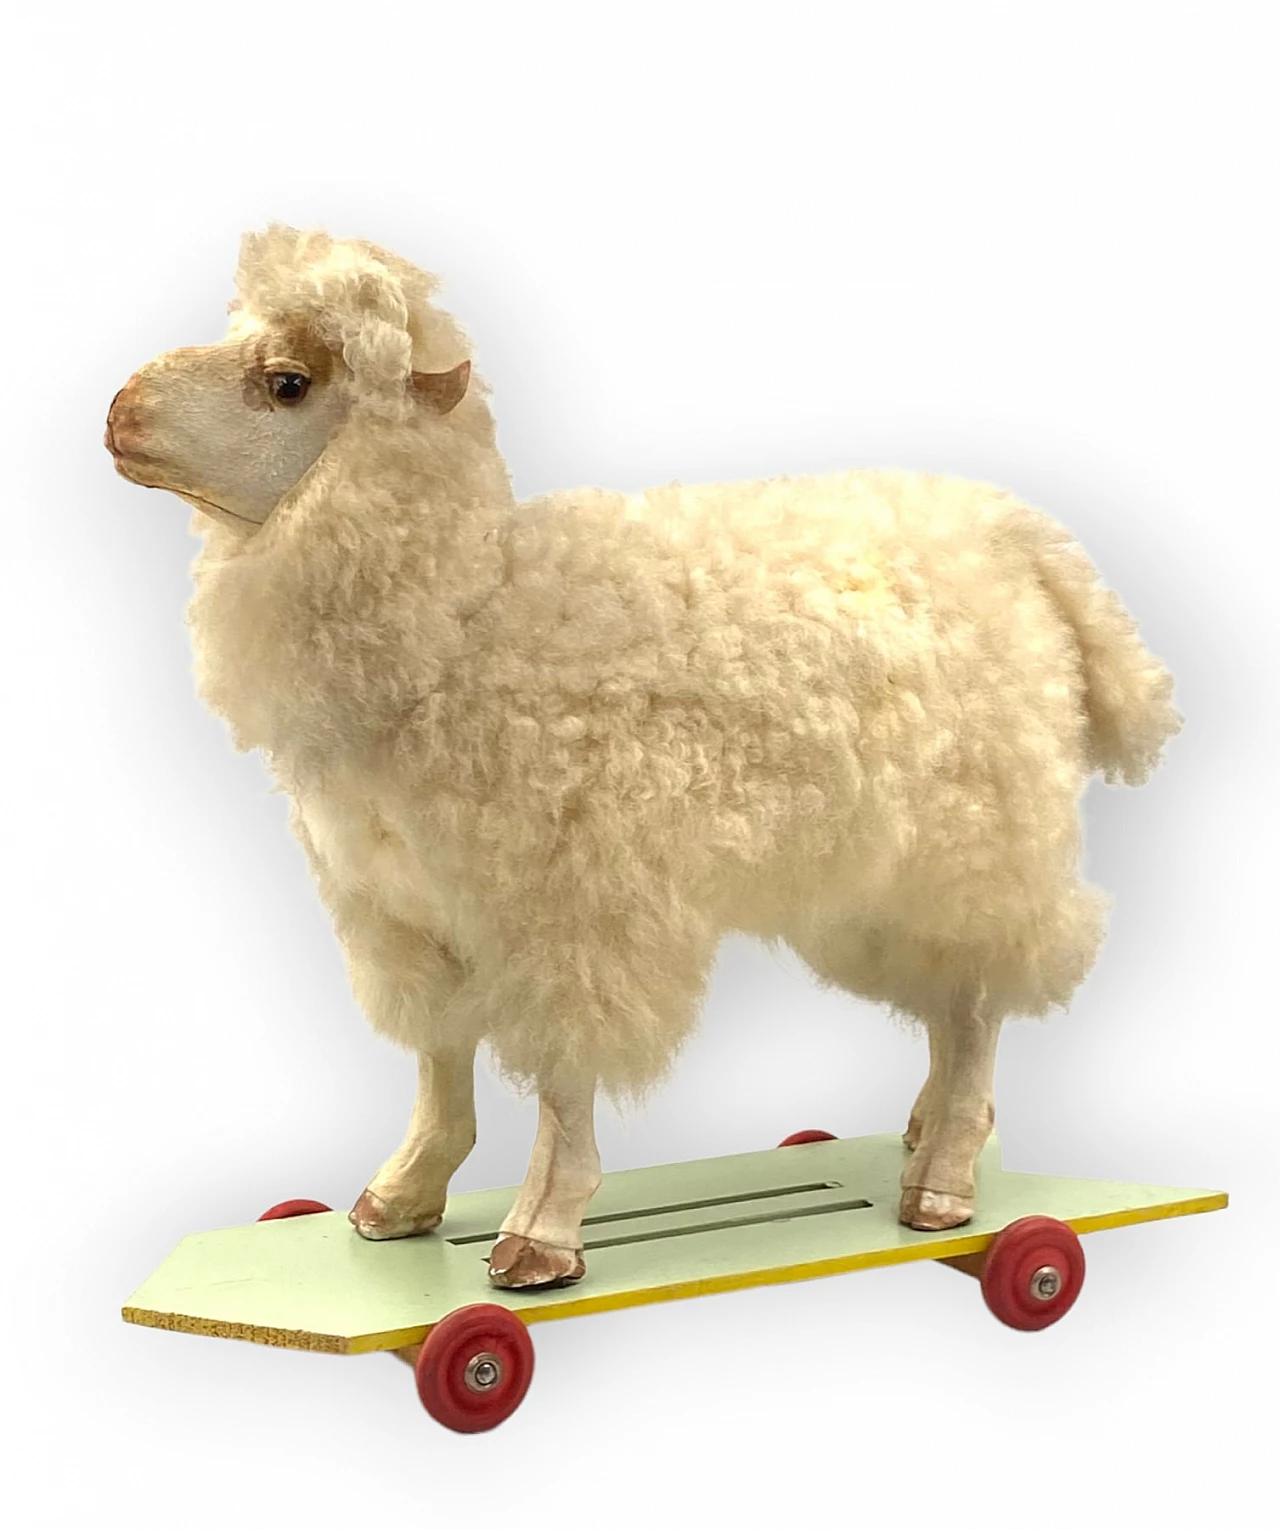 Wool and wood toy sheep with wheels 9